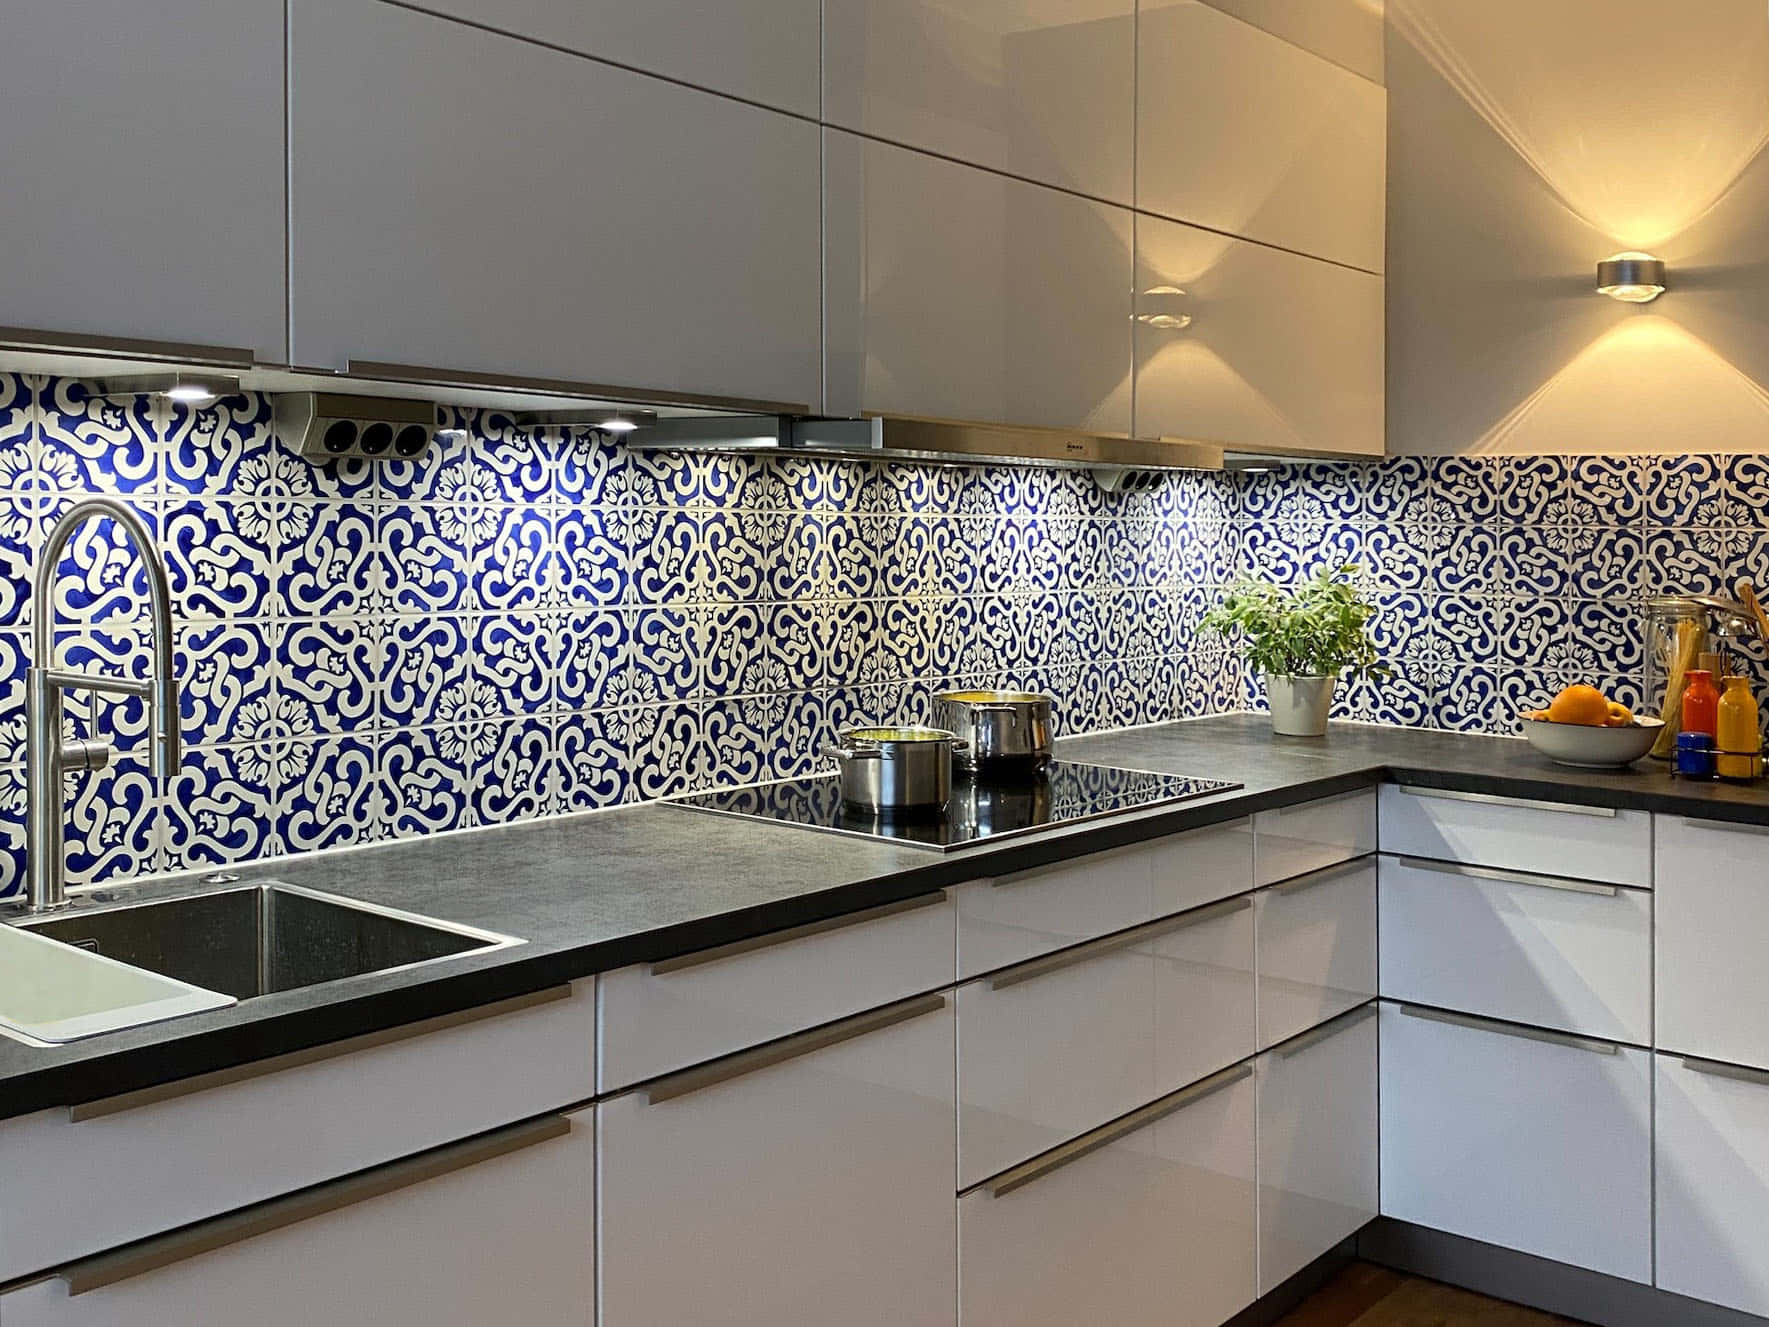 A White Kitchen With Blue And White Tile